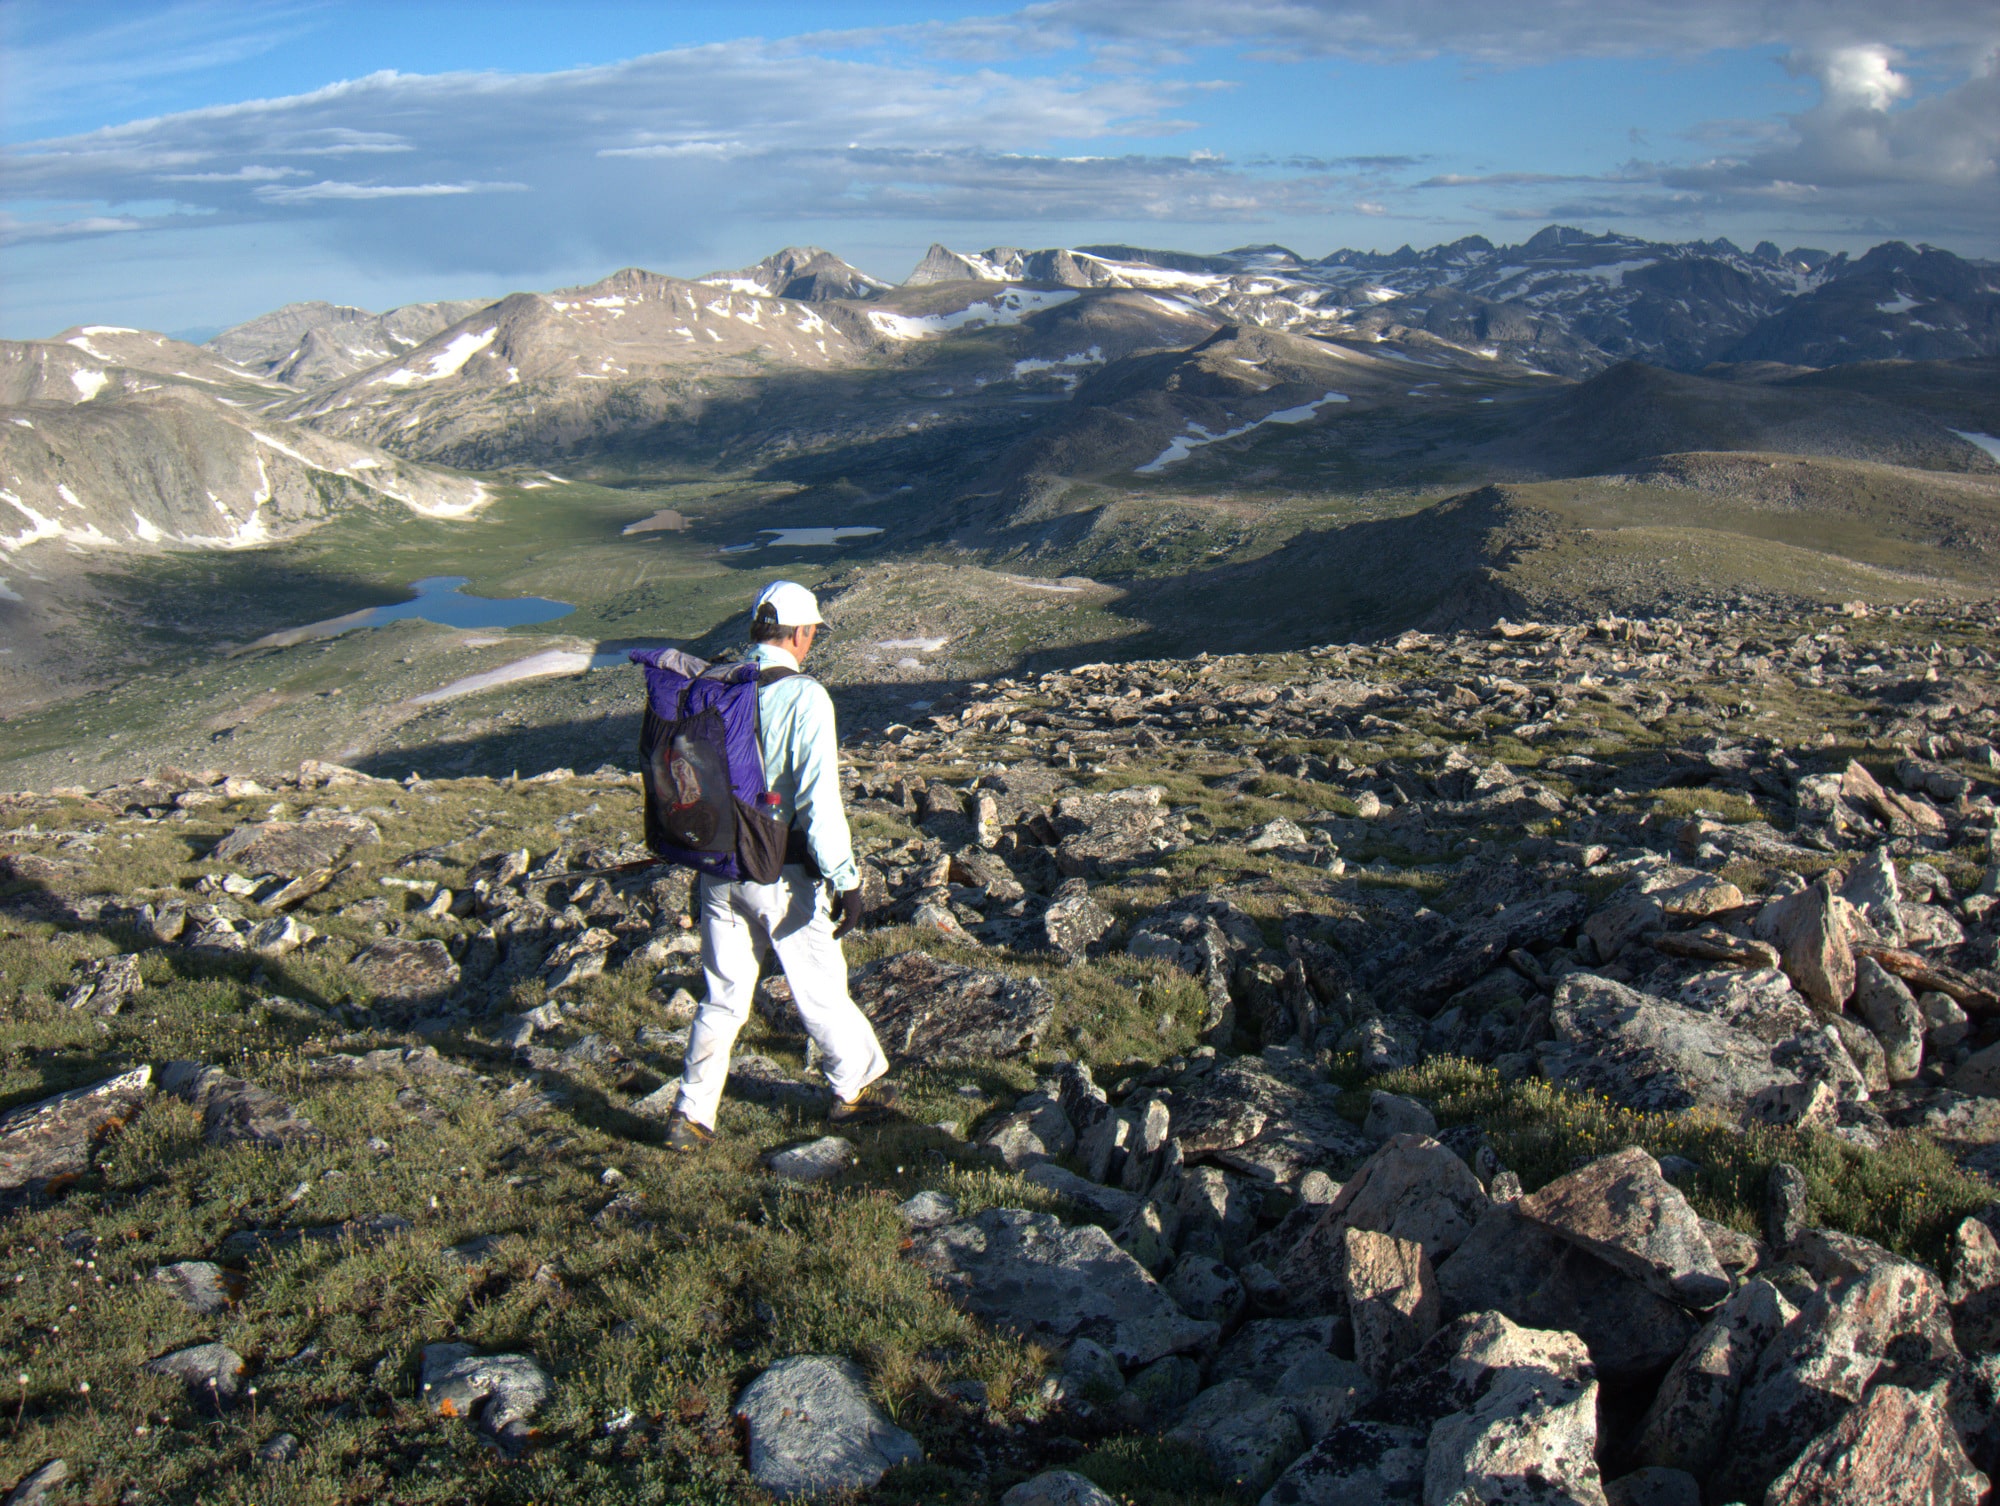 MOST BEAUTIFUL PLACE IN WYOMING?, BACKPACKING the WIND RIVER RANGE